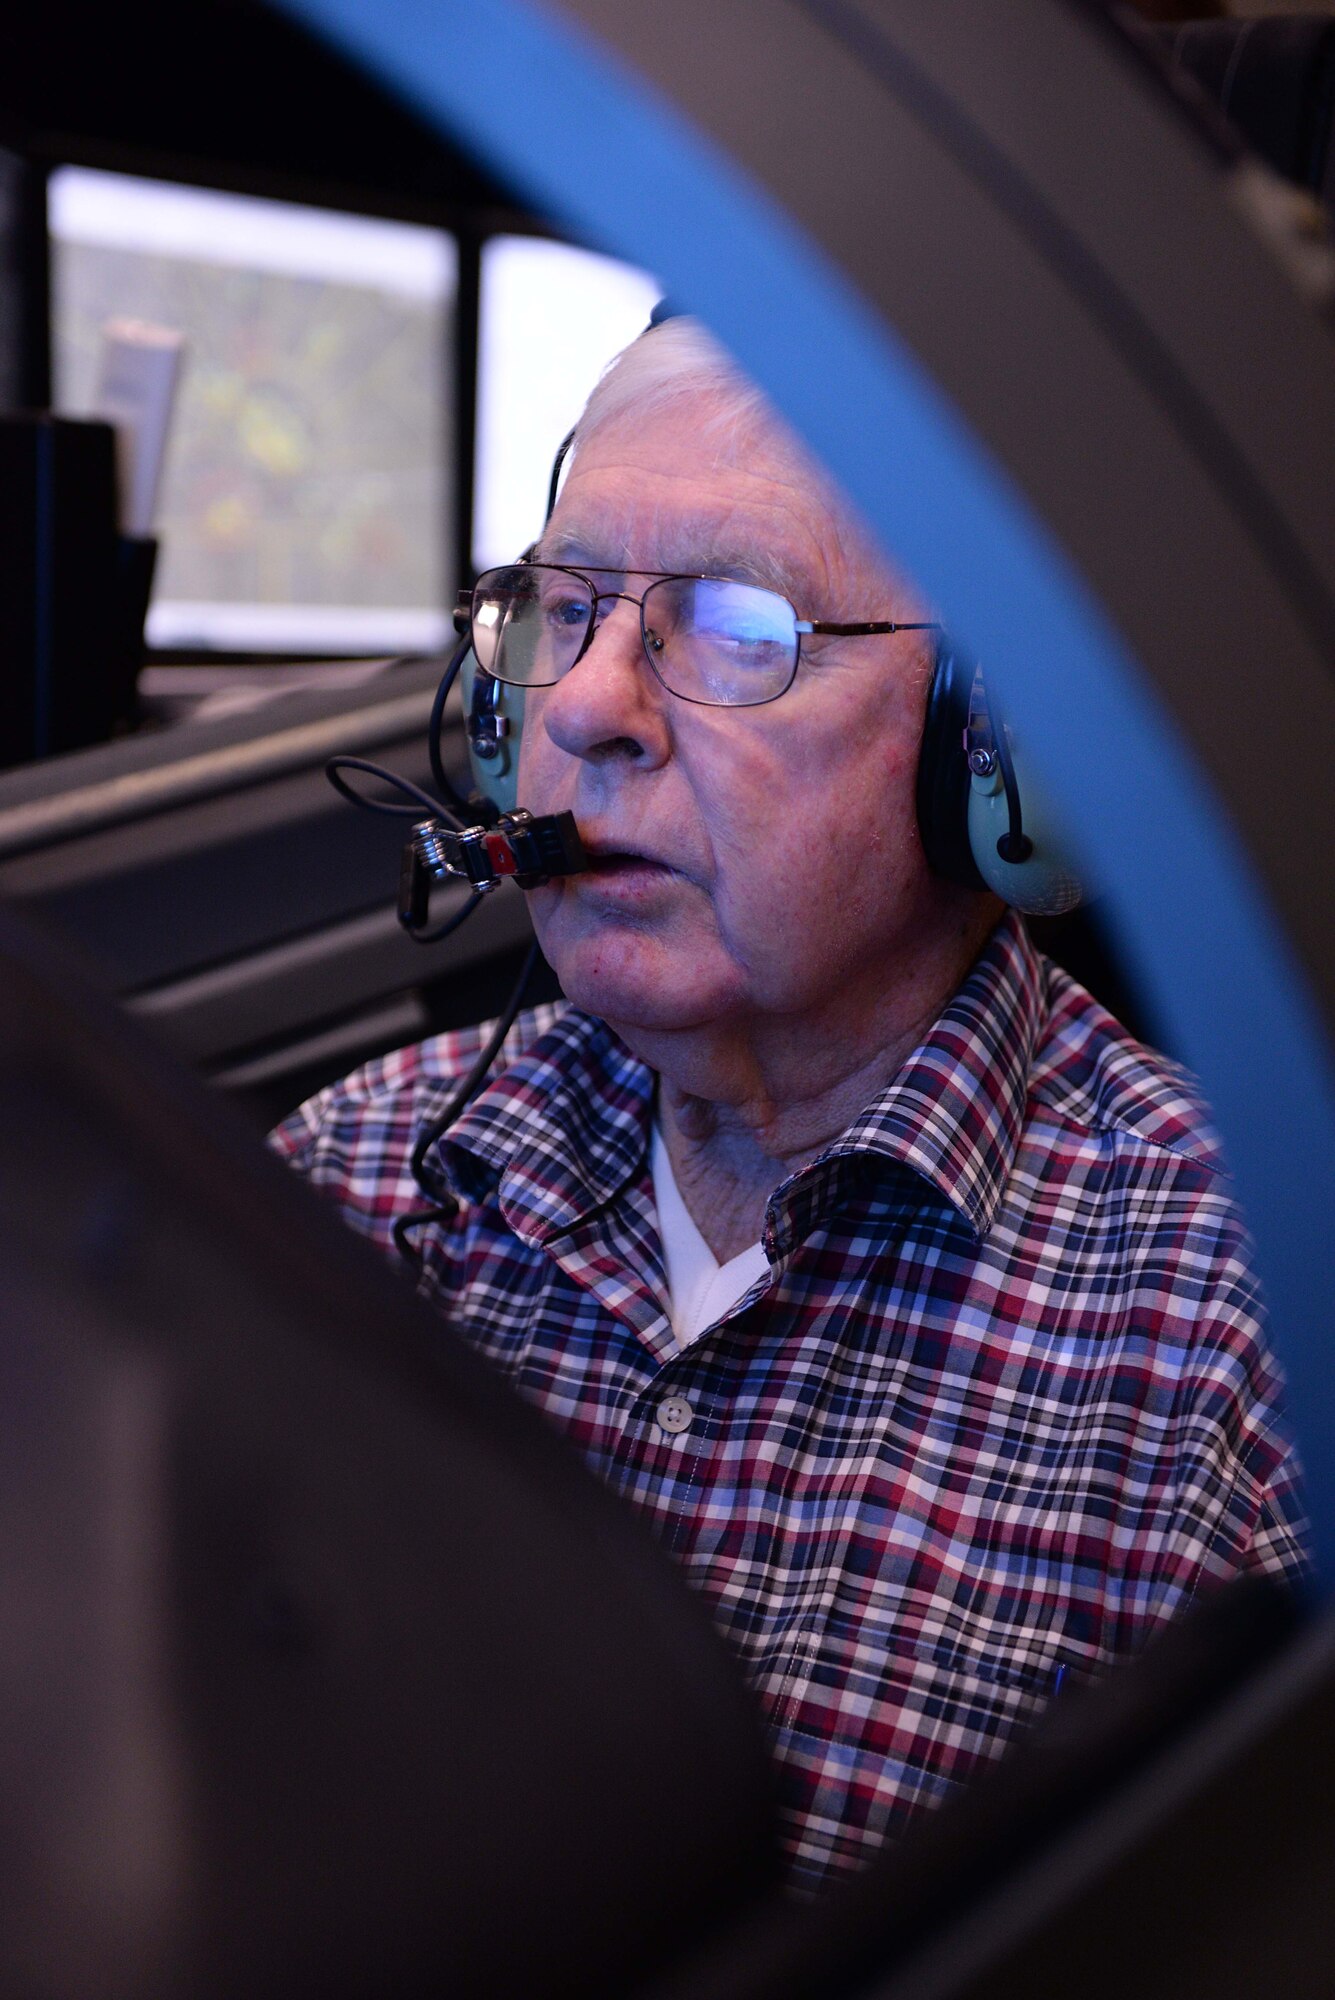 Retired Lt. Col. James Cole, former T-38 Talon pilot and Columbus, Mississippi, native, operates a T-38 Talon simulator Jan. 16, 2019, at the 14th Operations Group on Columbus Air Force Base. Cole flew a variety of aircraft during his 23-year military career, including the T-38. (U.S. Air Force photo by Airman Hannah Bean)